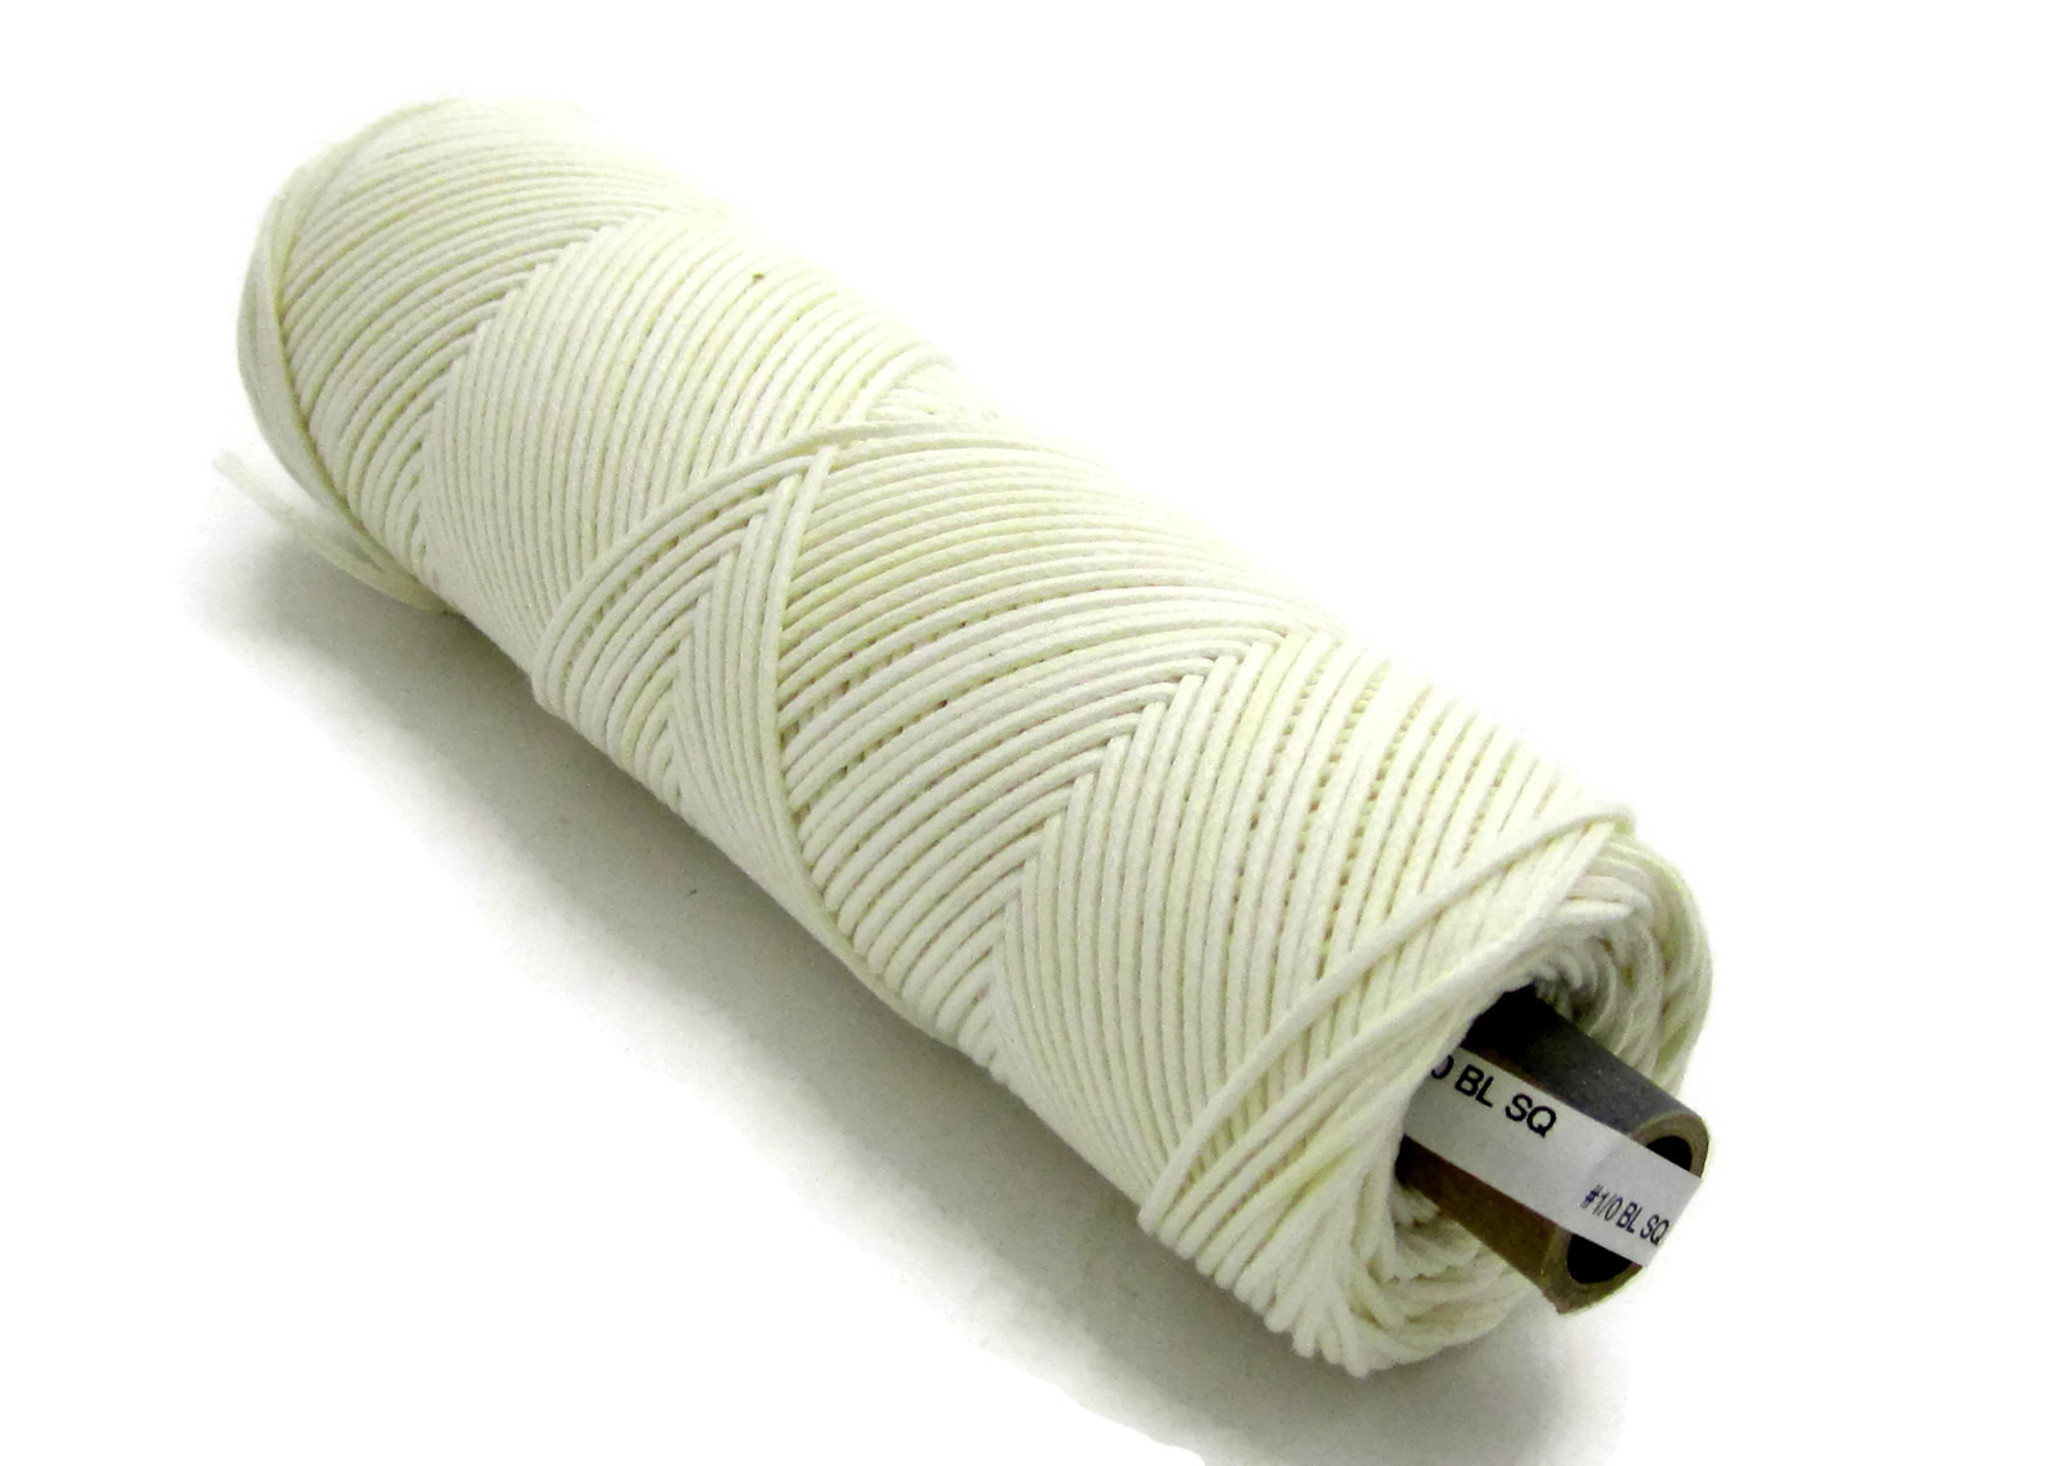 1 Spool 18 Ply Candle Core Braided Cotton Candle Wick for Handmade Candles